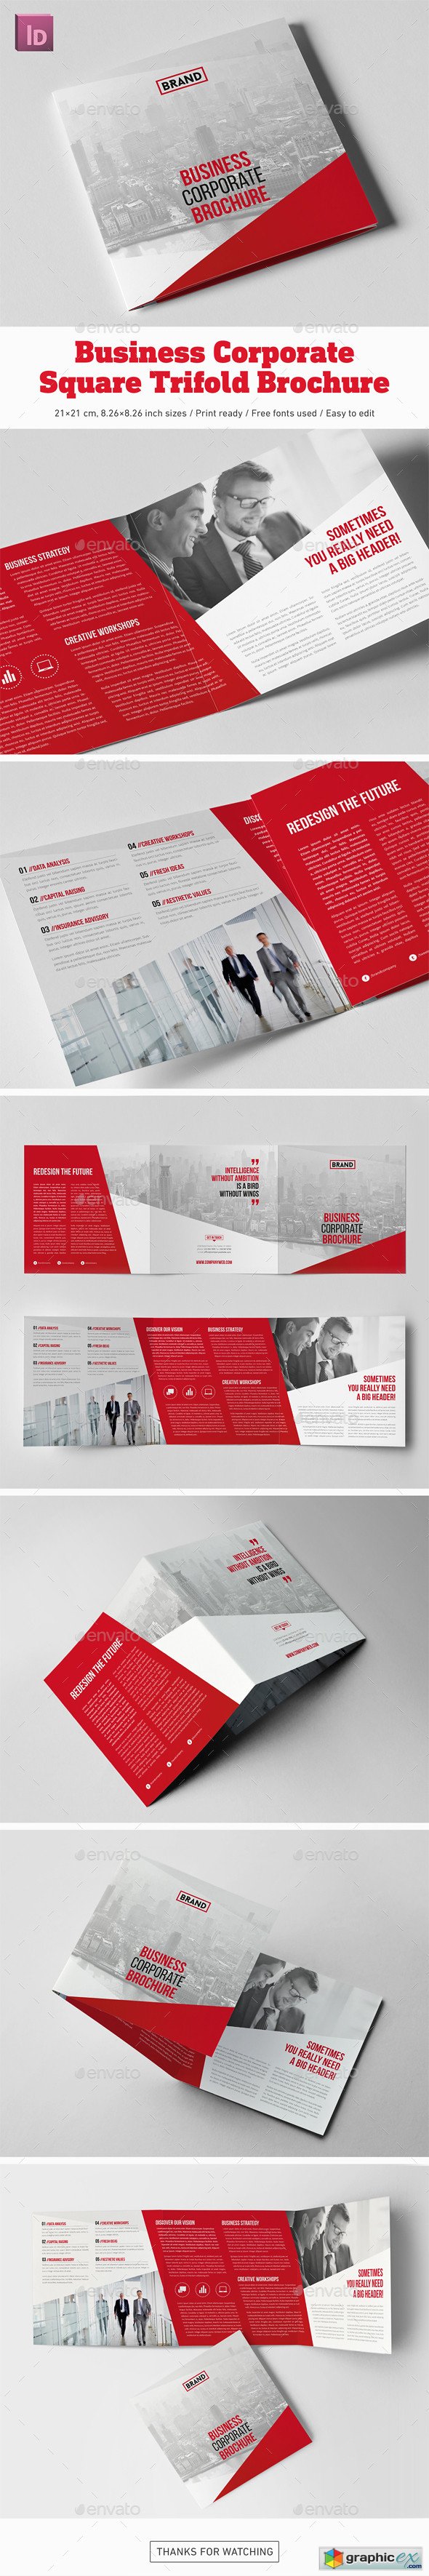 Business Corporate Square Trifold Brochure